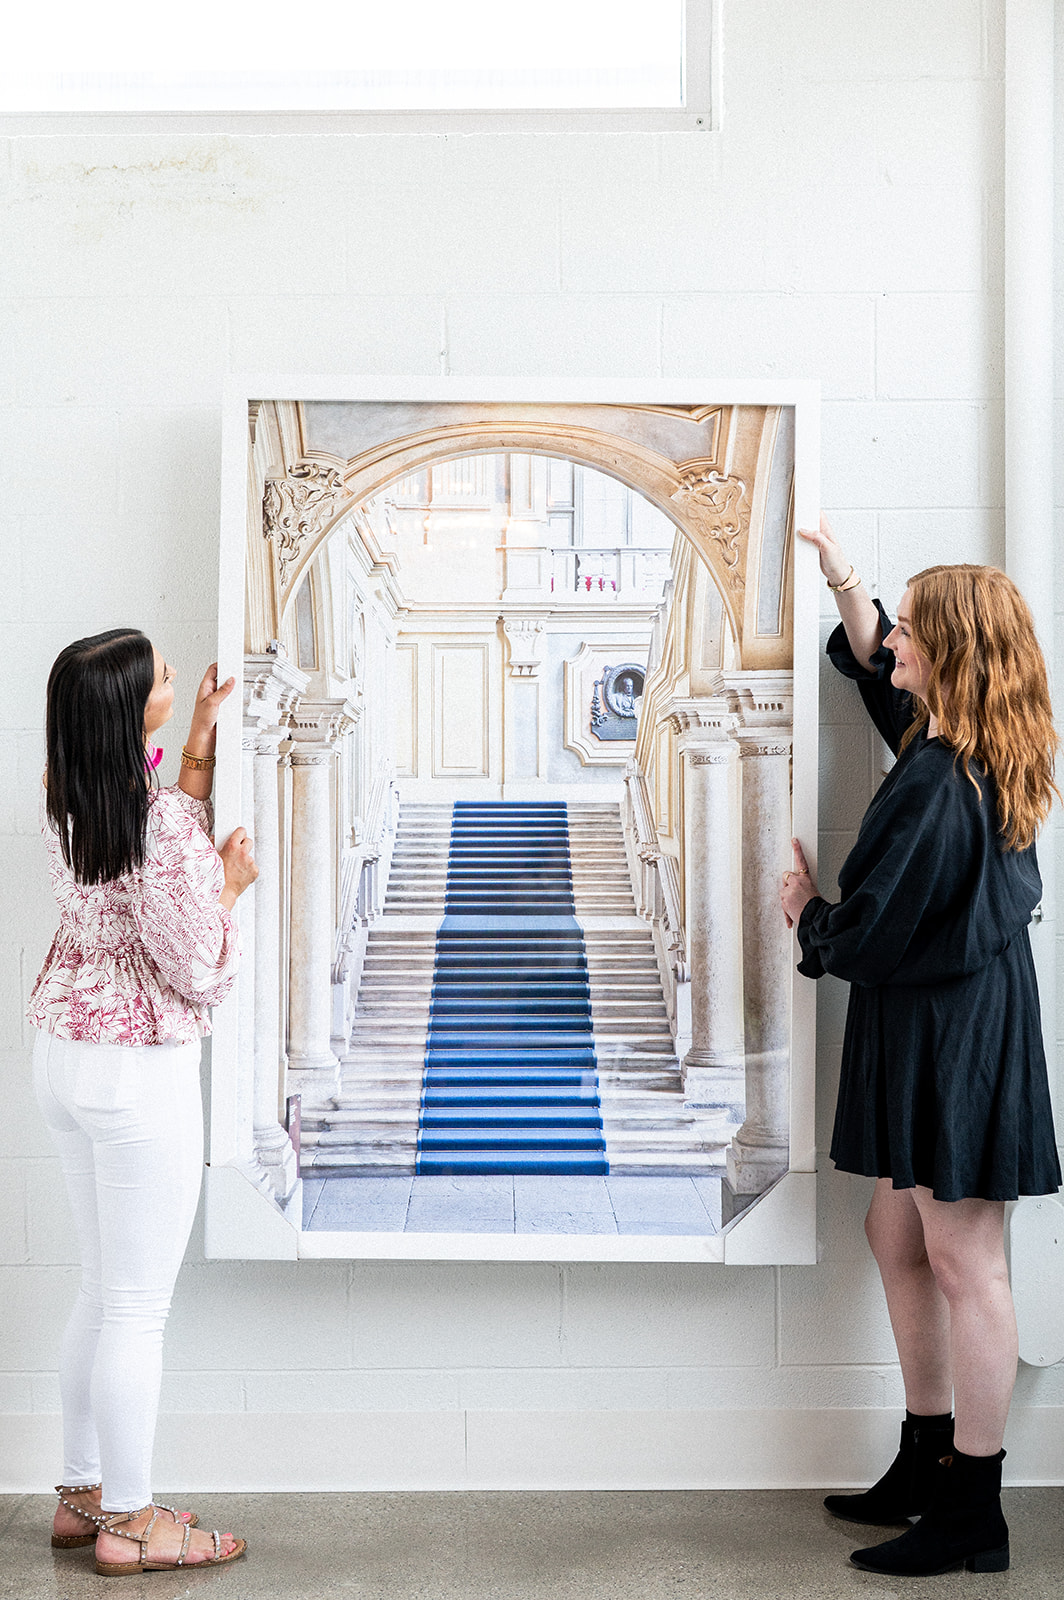 2 women in dressed up nicely are hanging a large photograph of a grand entryway on a white wall